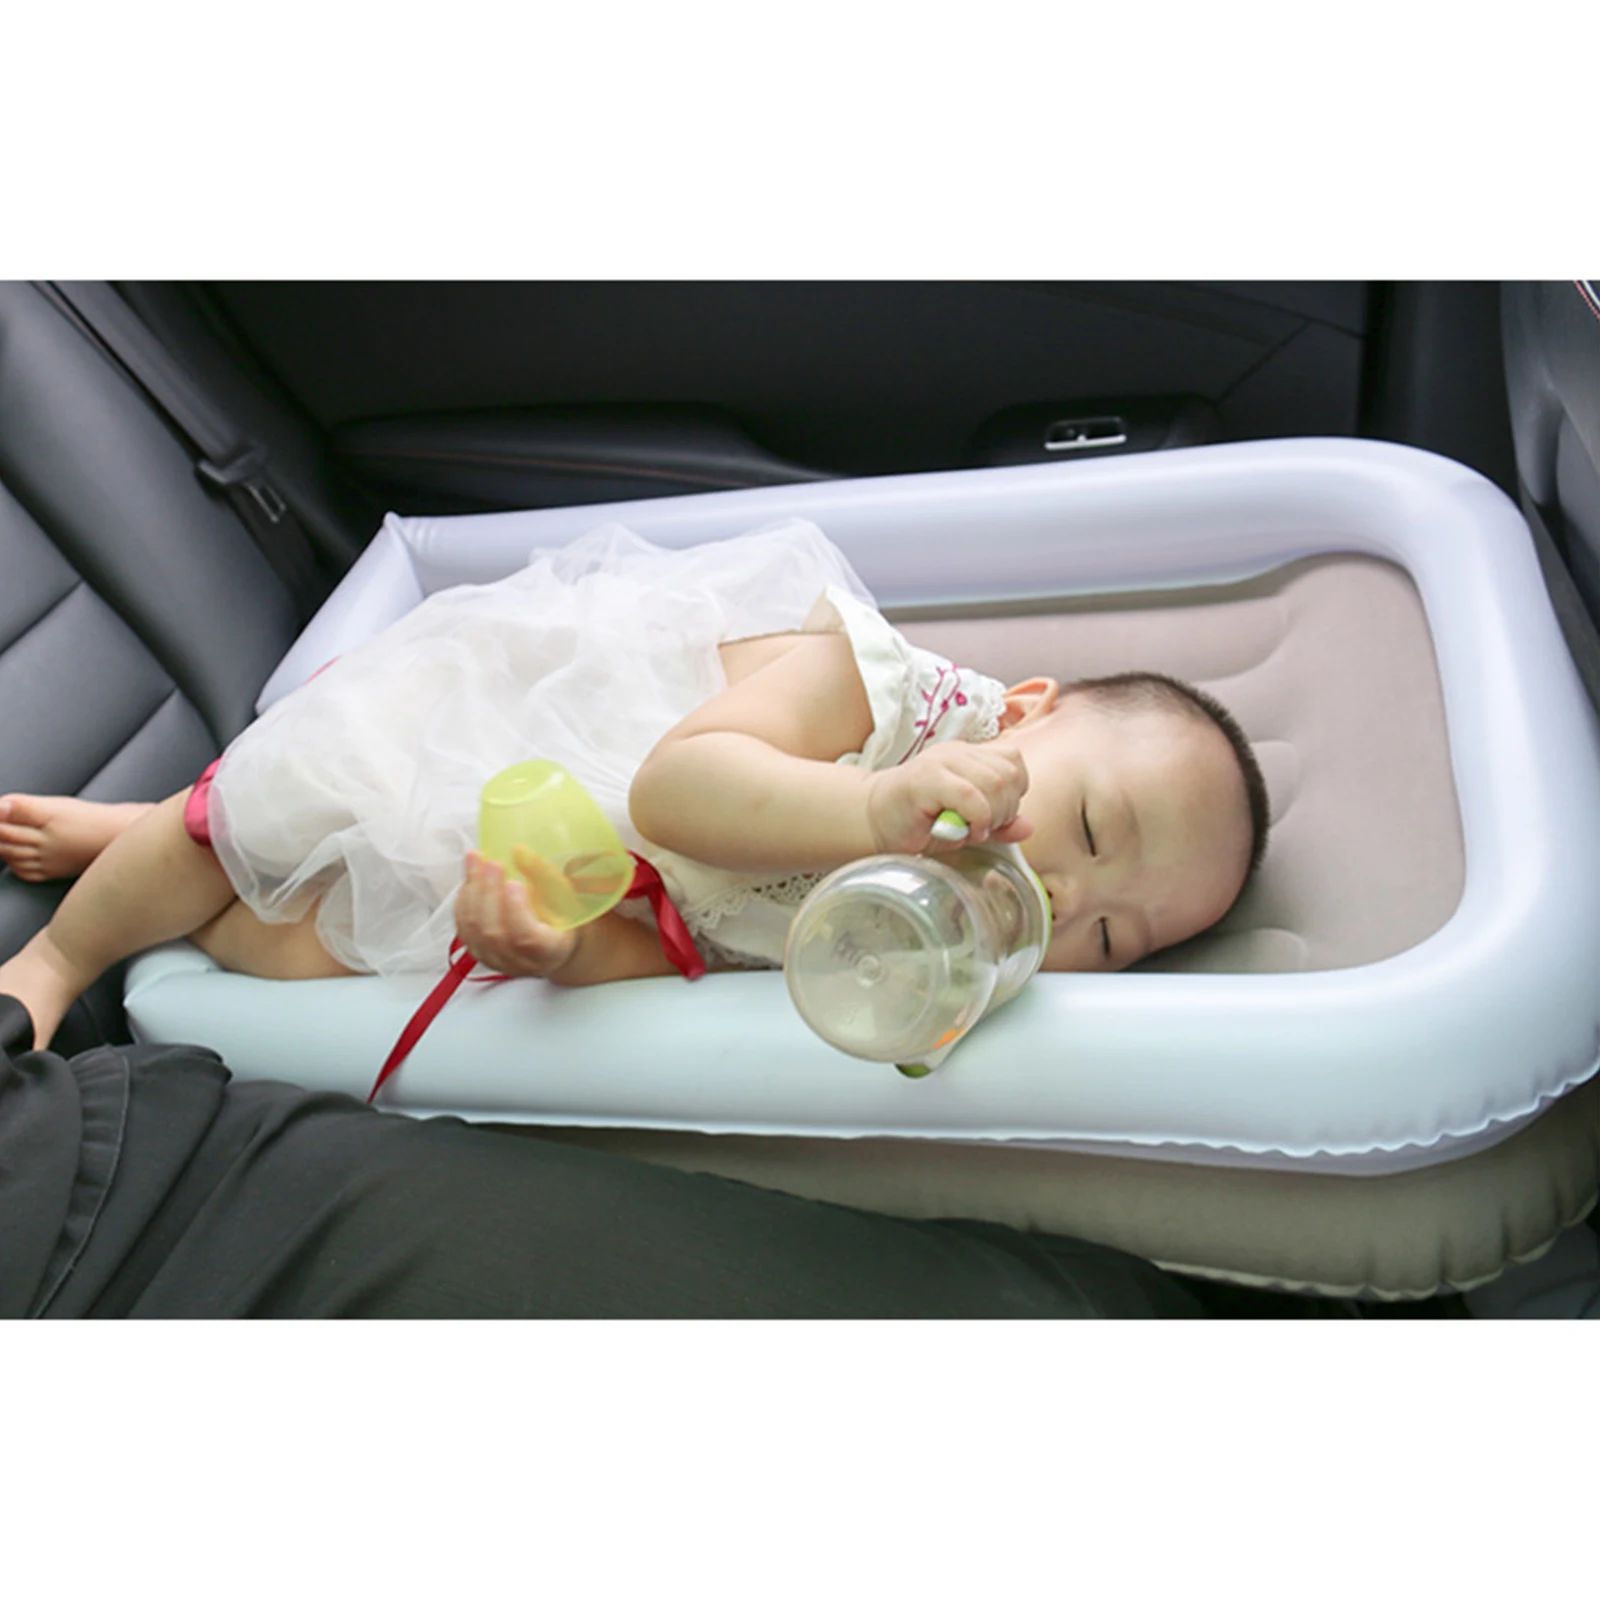 

Baby Inflatable Bed Car Mattress To Sleep Air Matt For Car Air Plane High Speed Rail Foading Bed Travel Comfortable Accessory